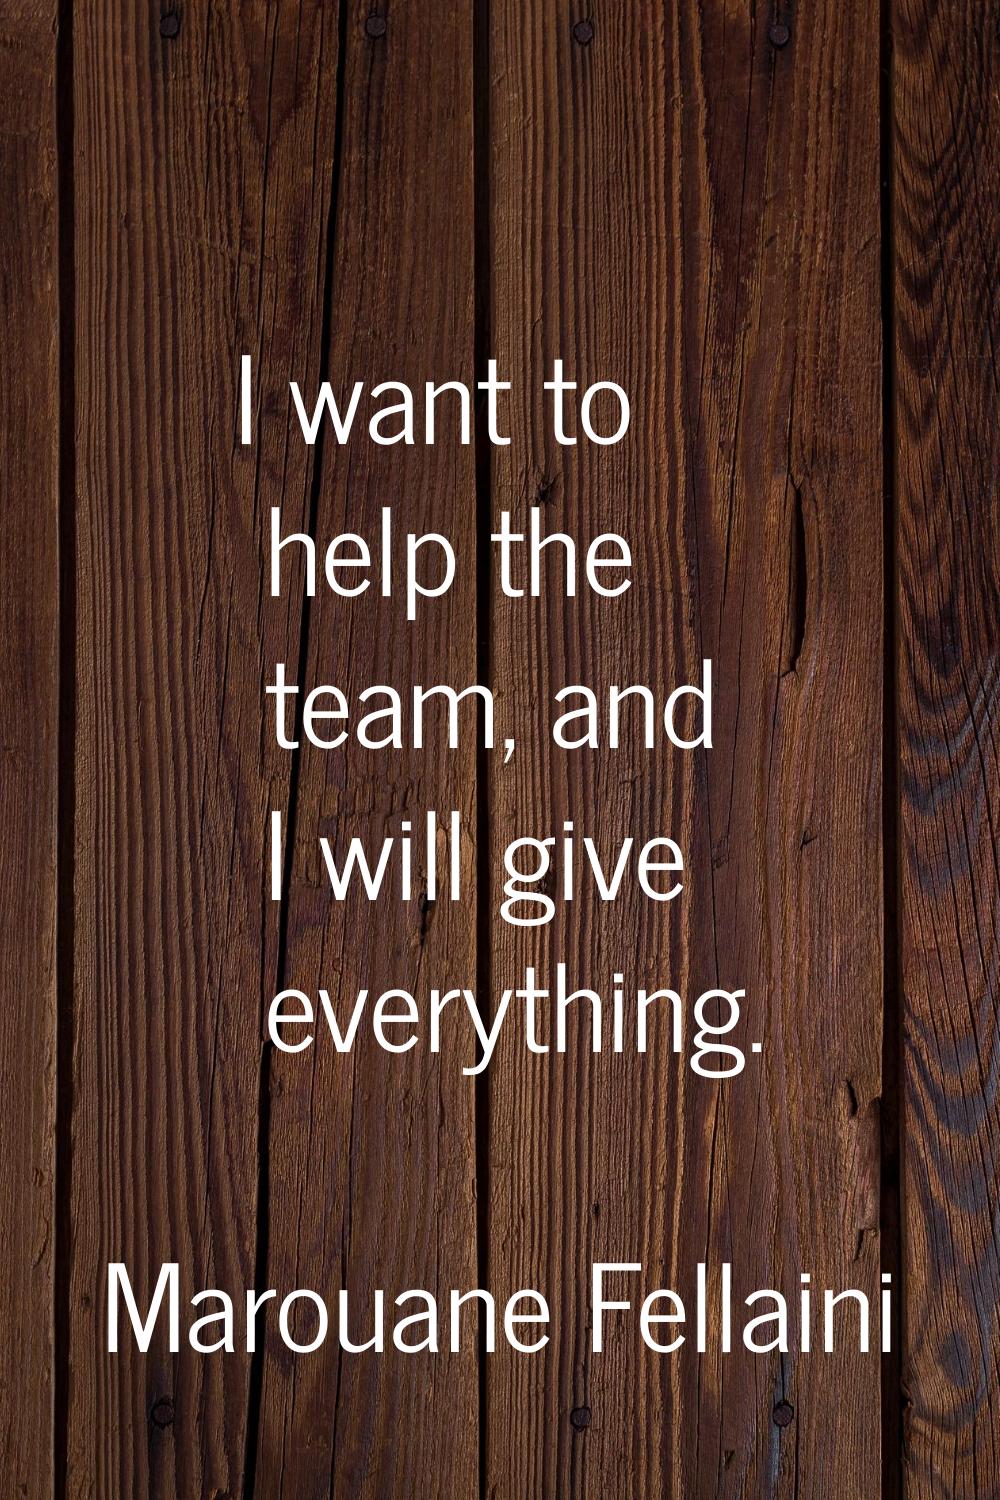 I want to help the team, and I will give everything.